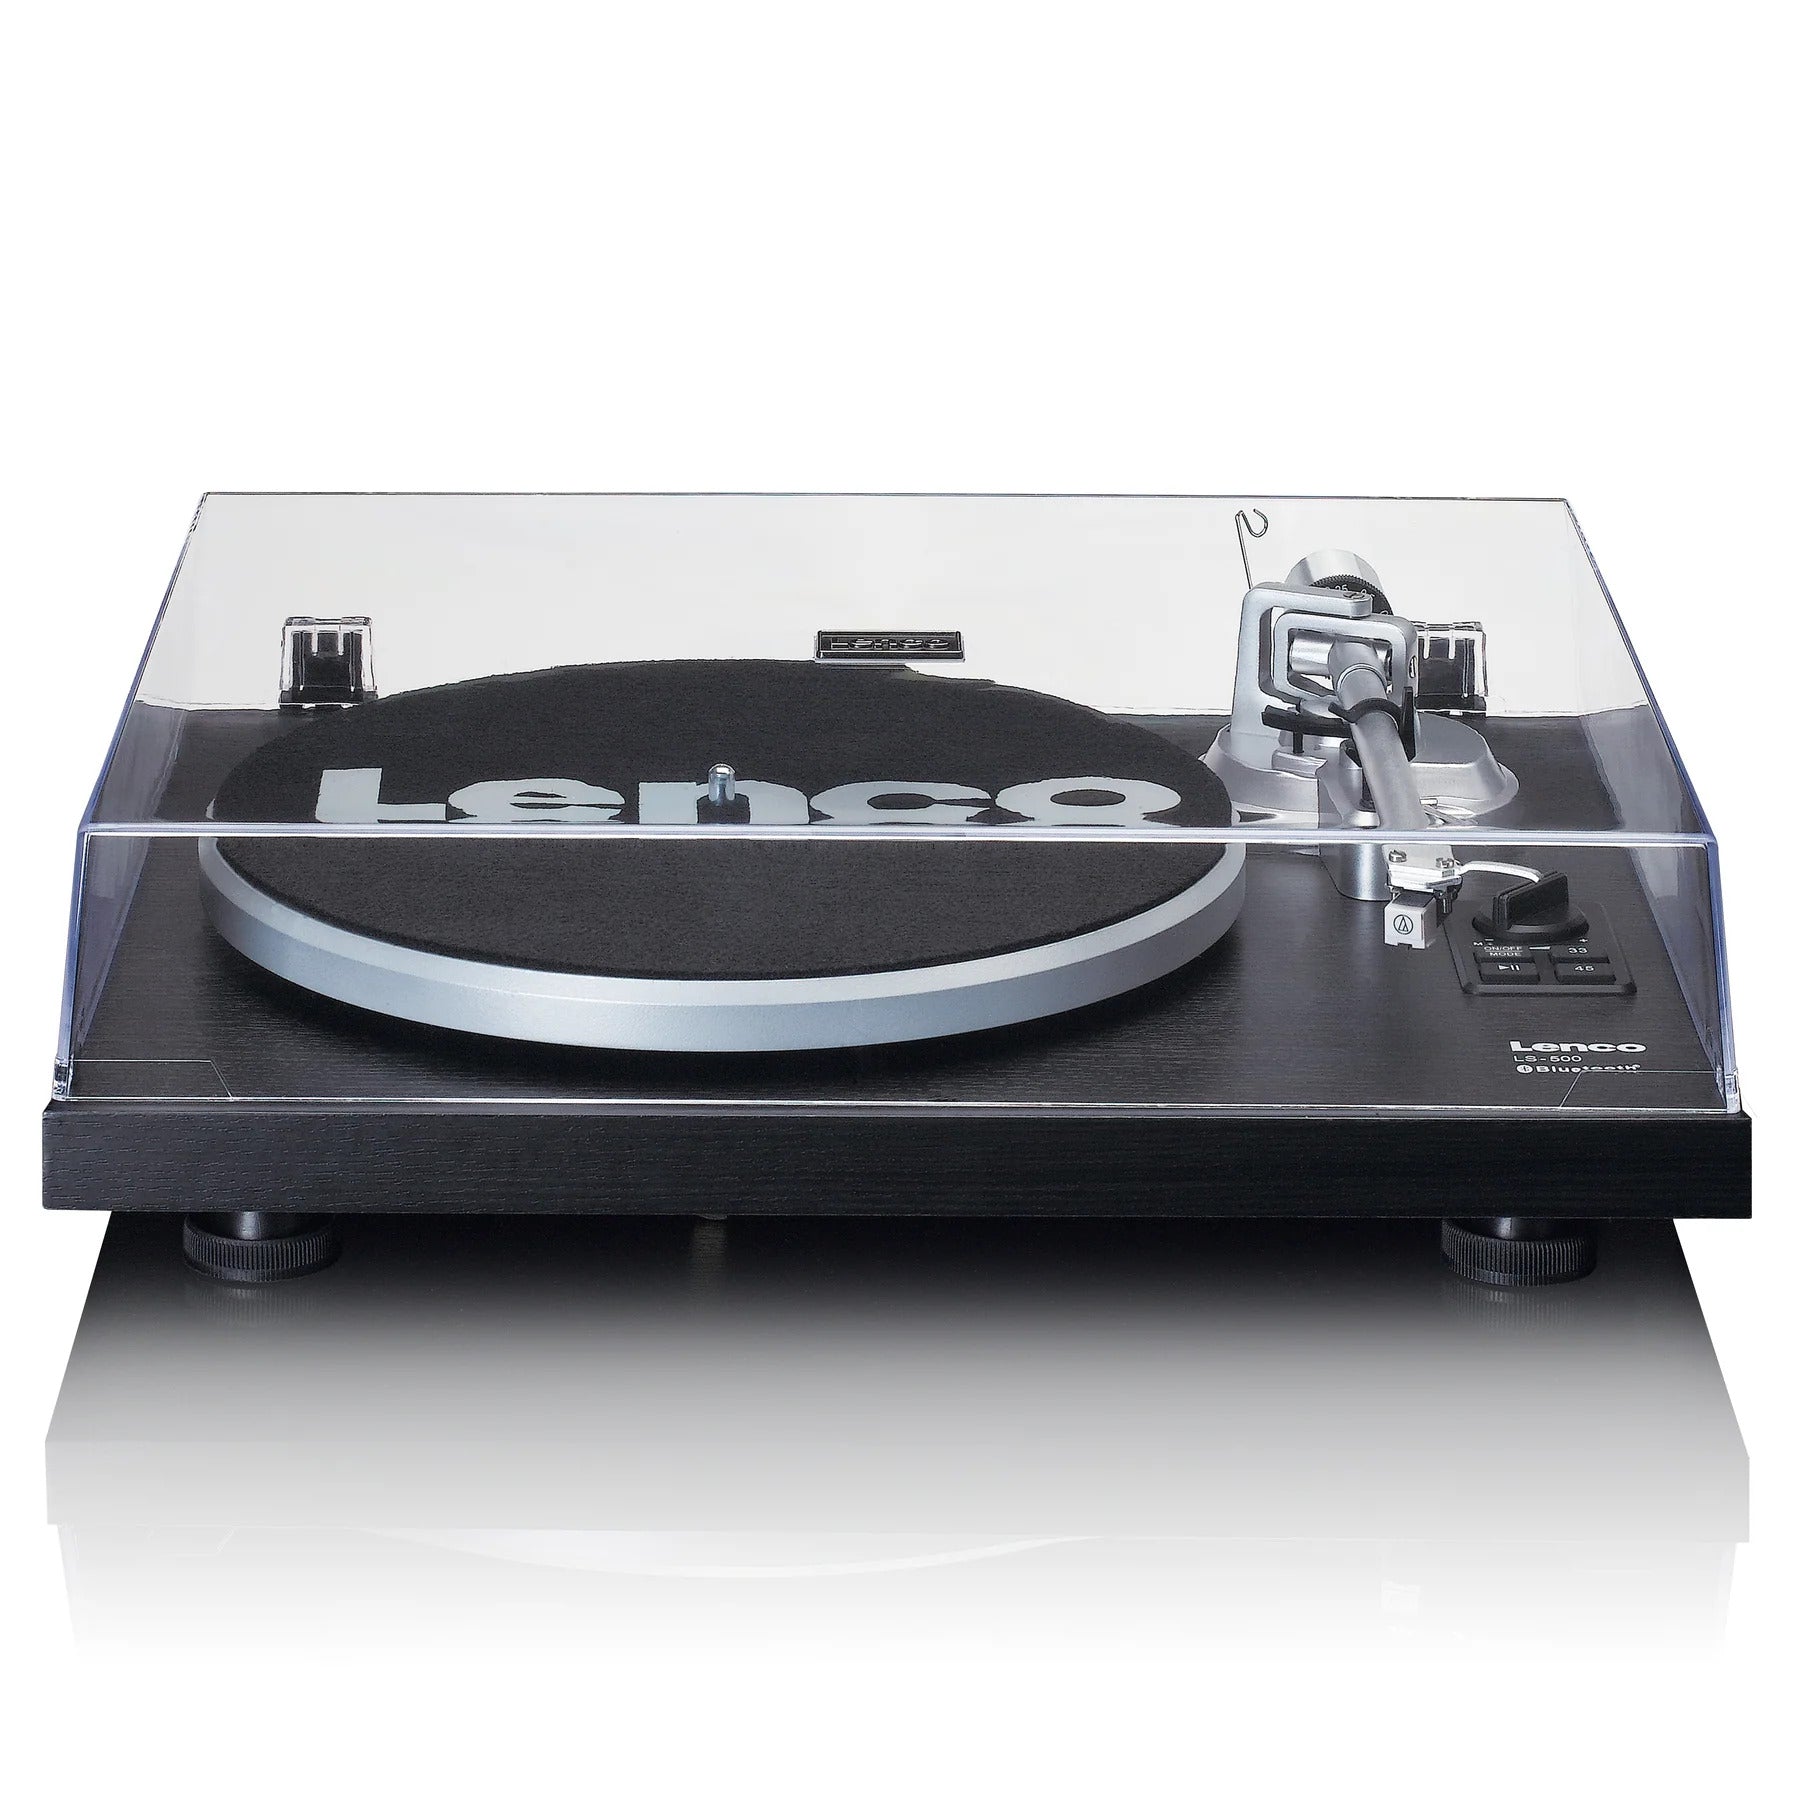 Lenco LS-500 Turntable Music System with Two 30W External Speakers